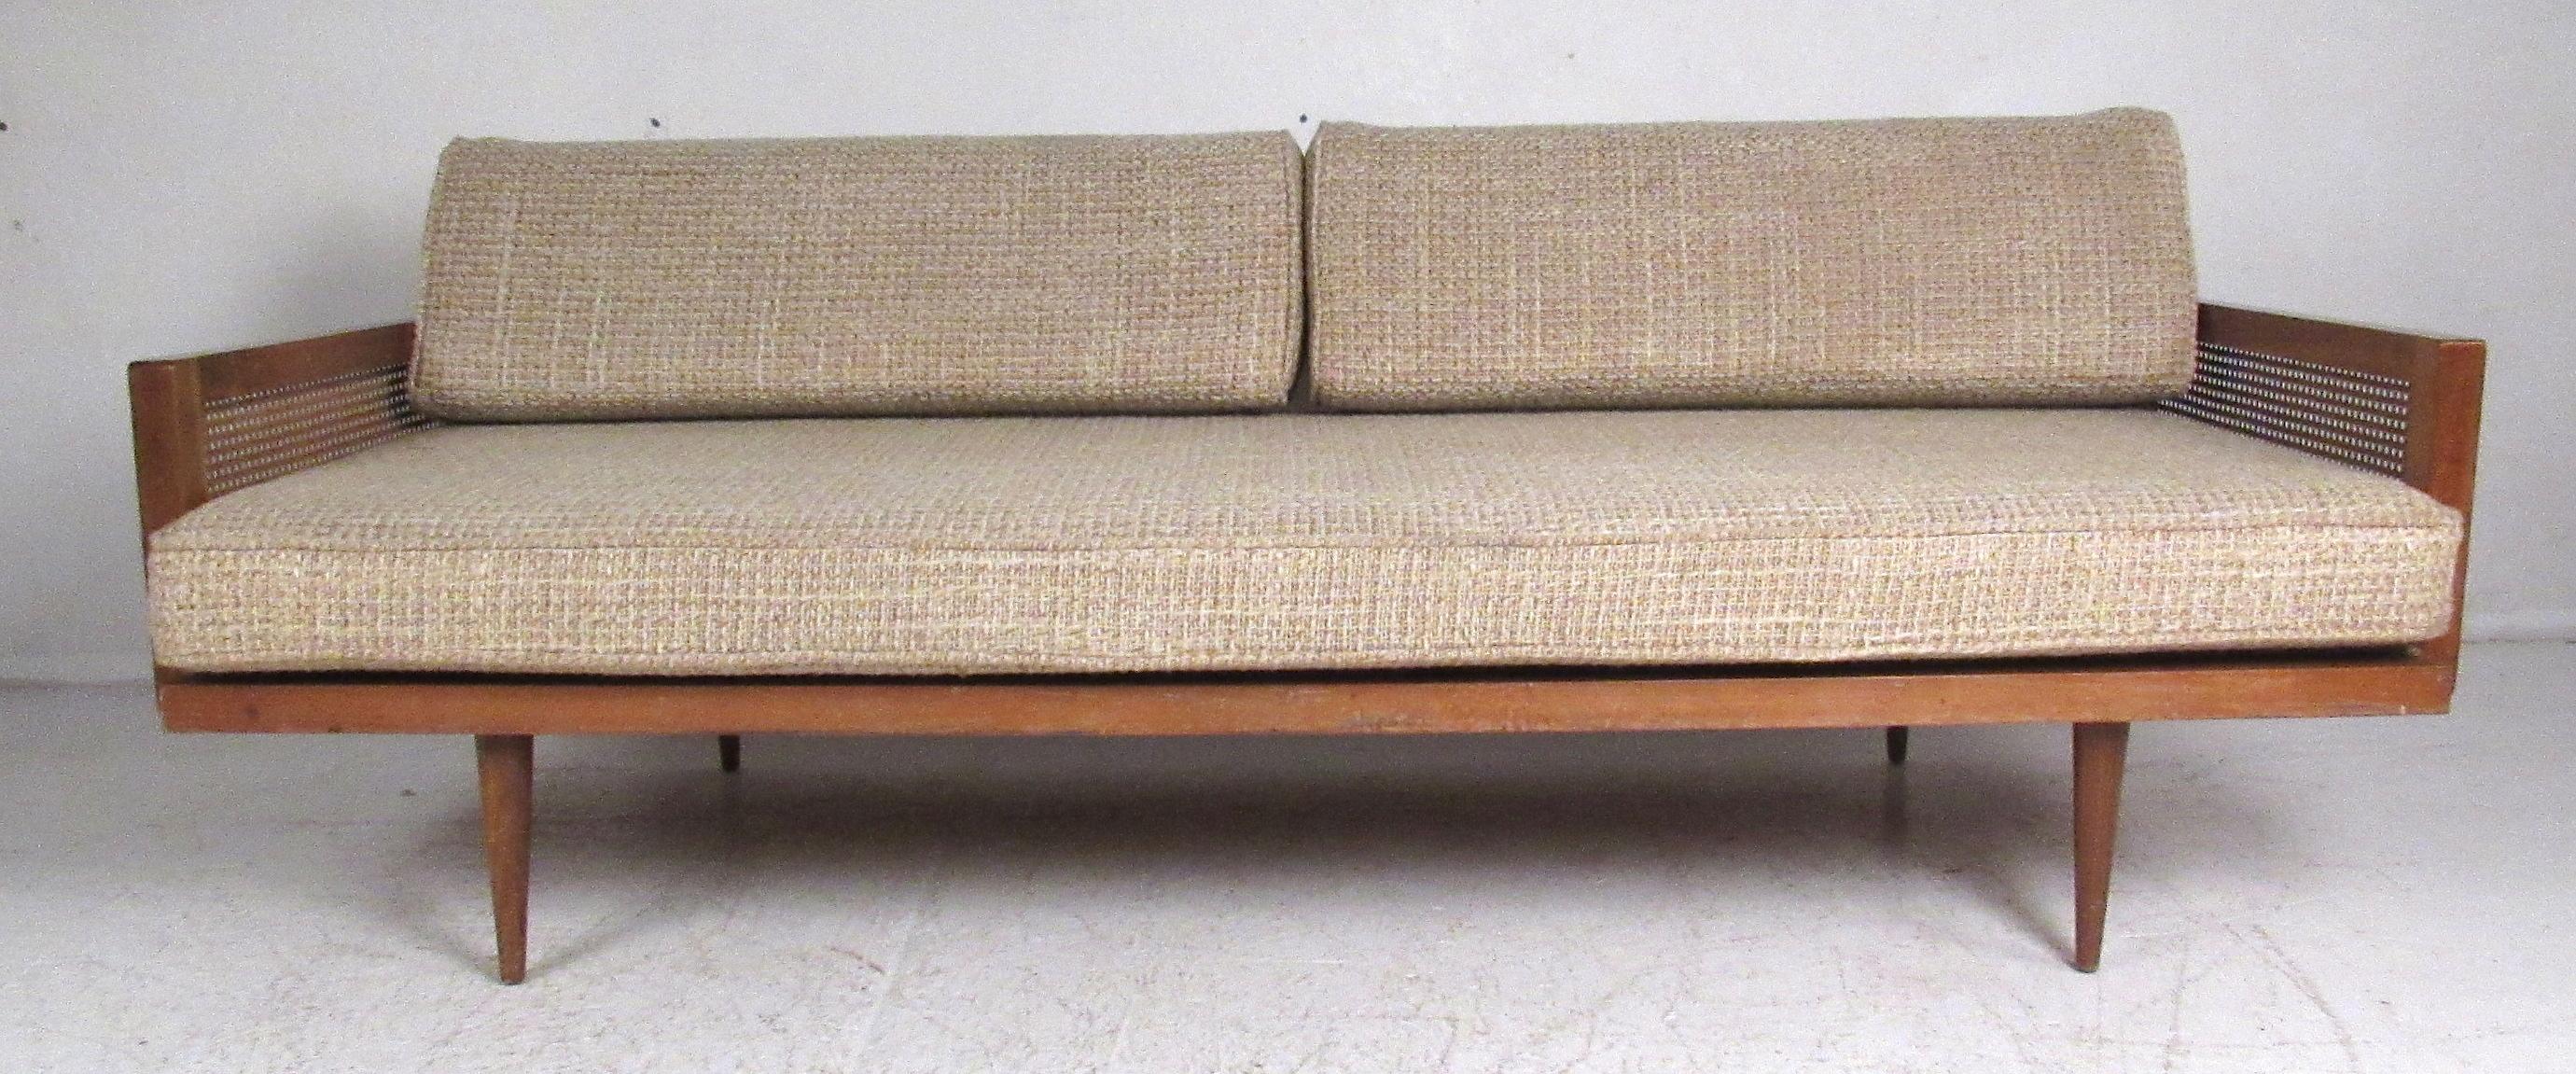 Vintage midcentury walnut frame sofa with cane sides and tapered legs. Nicely proportioned, with the long tapered legs creating an elegant airy quality, typical of midcentury design. Please confirm item location (NY or NJ) with dealer.
 